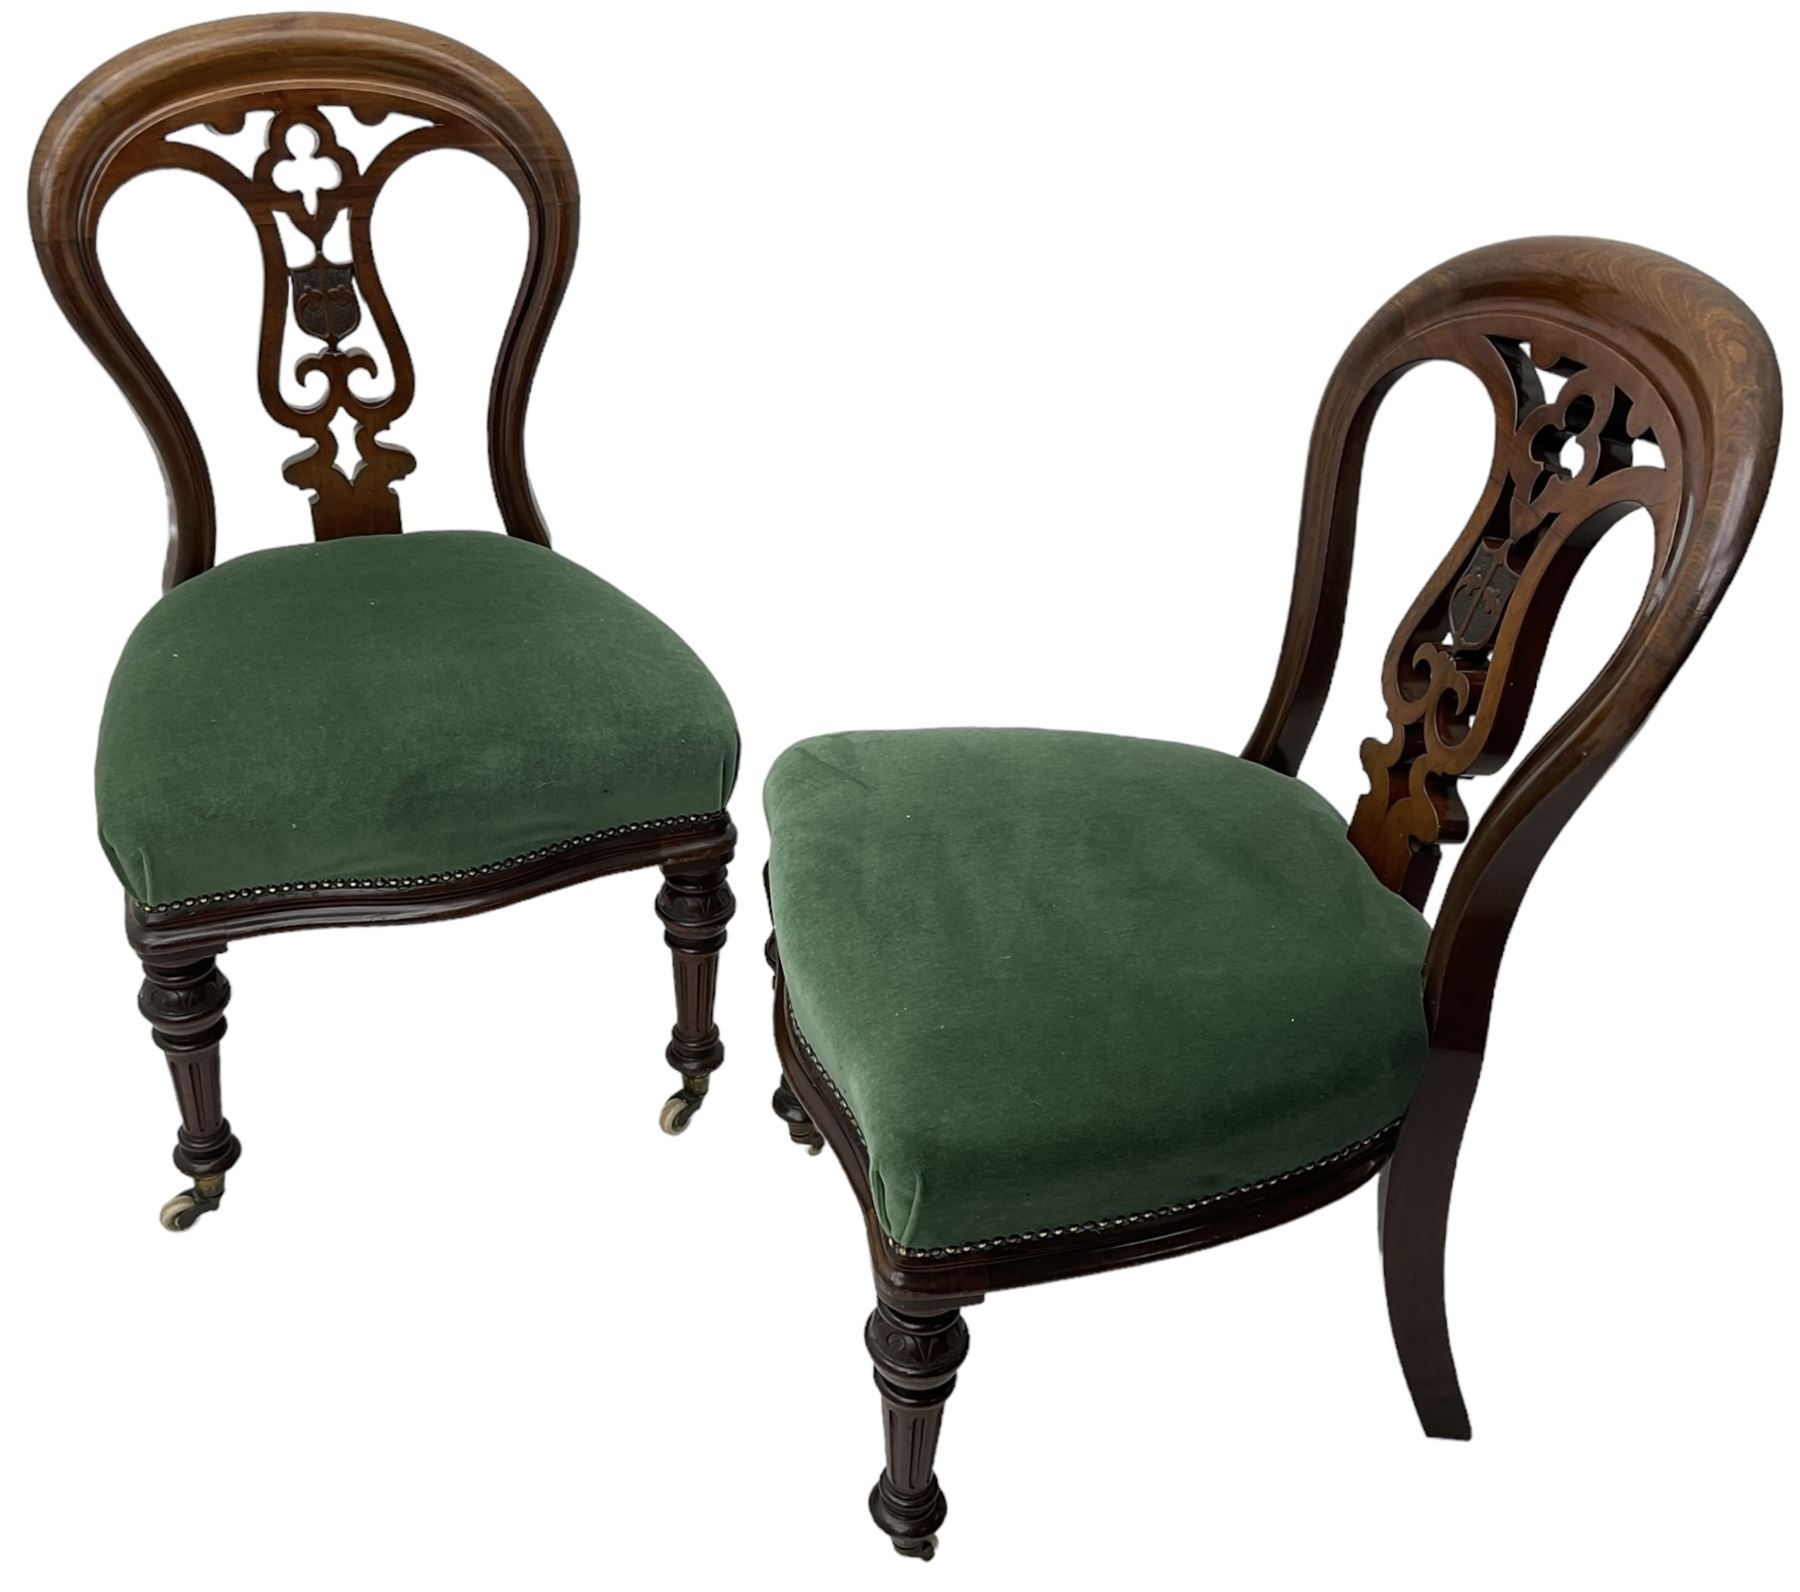 Pair of Victorian mahogany dining chairs - Image 4 of 6